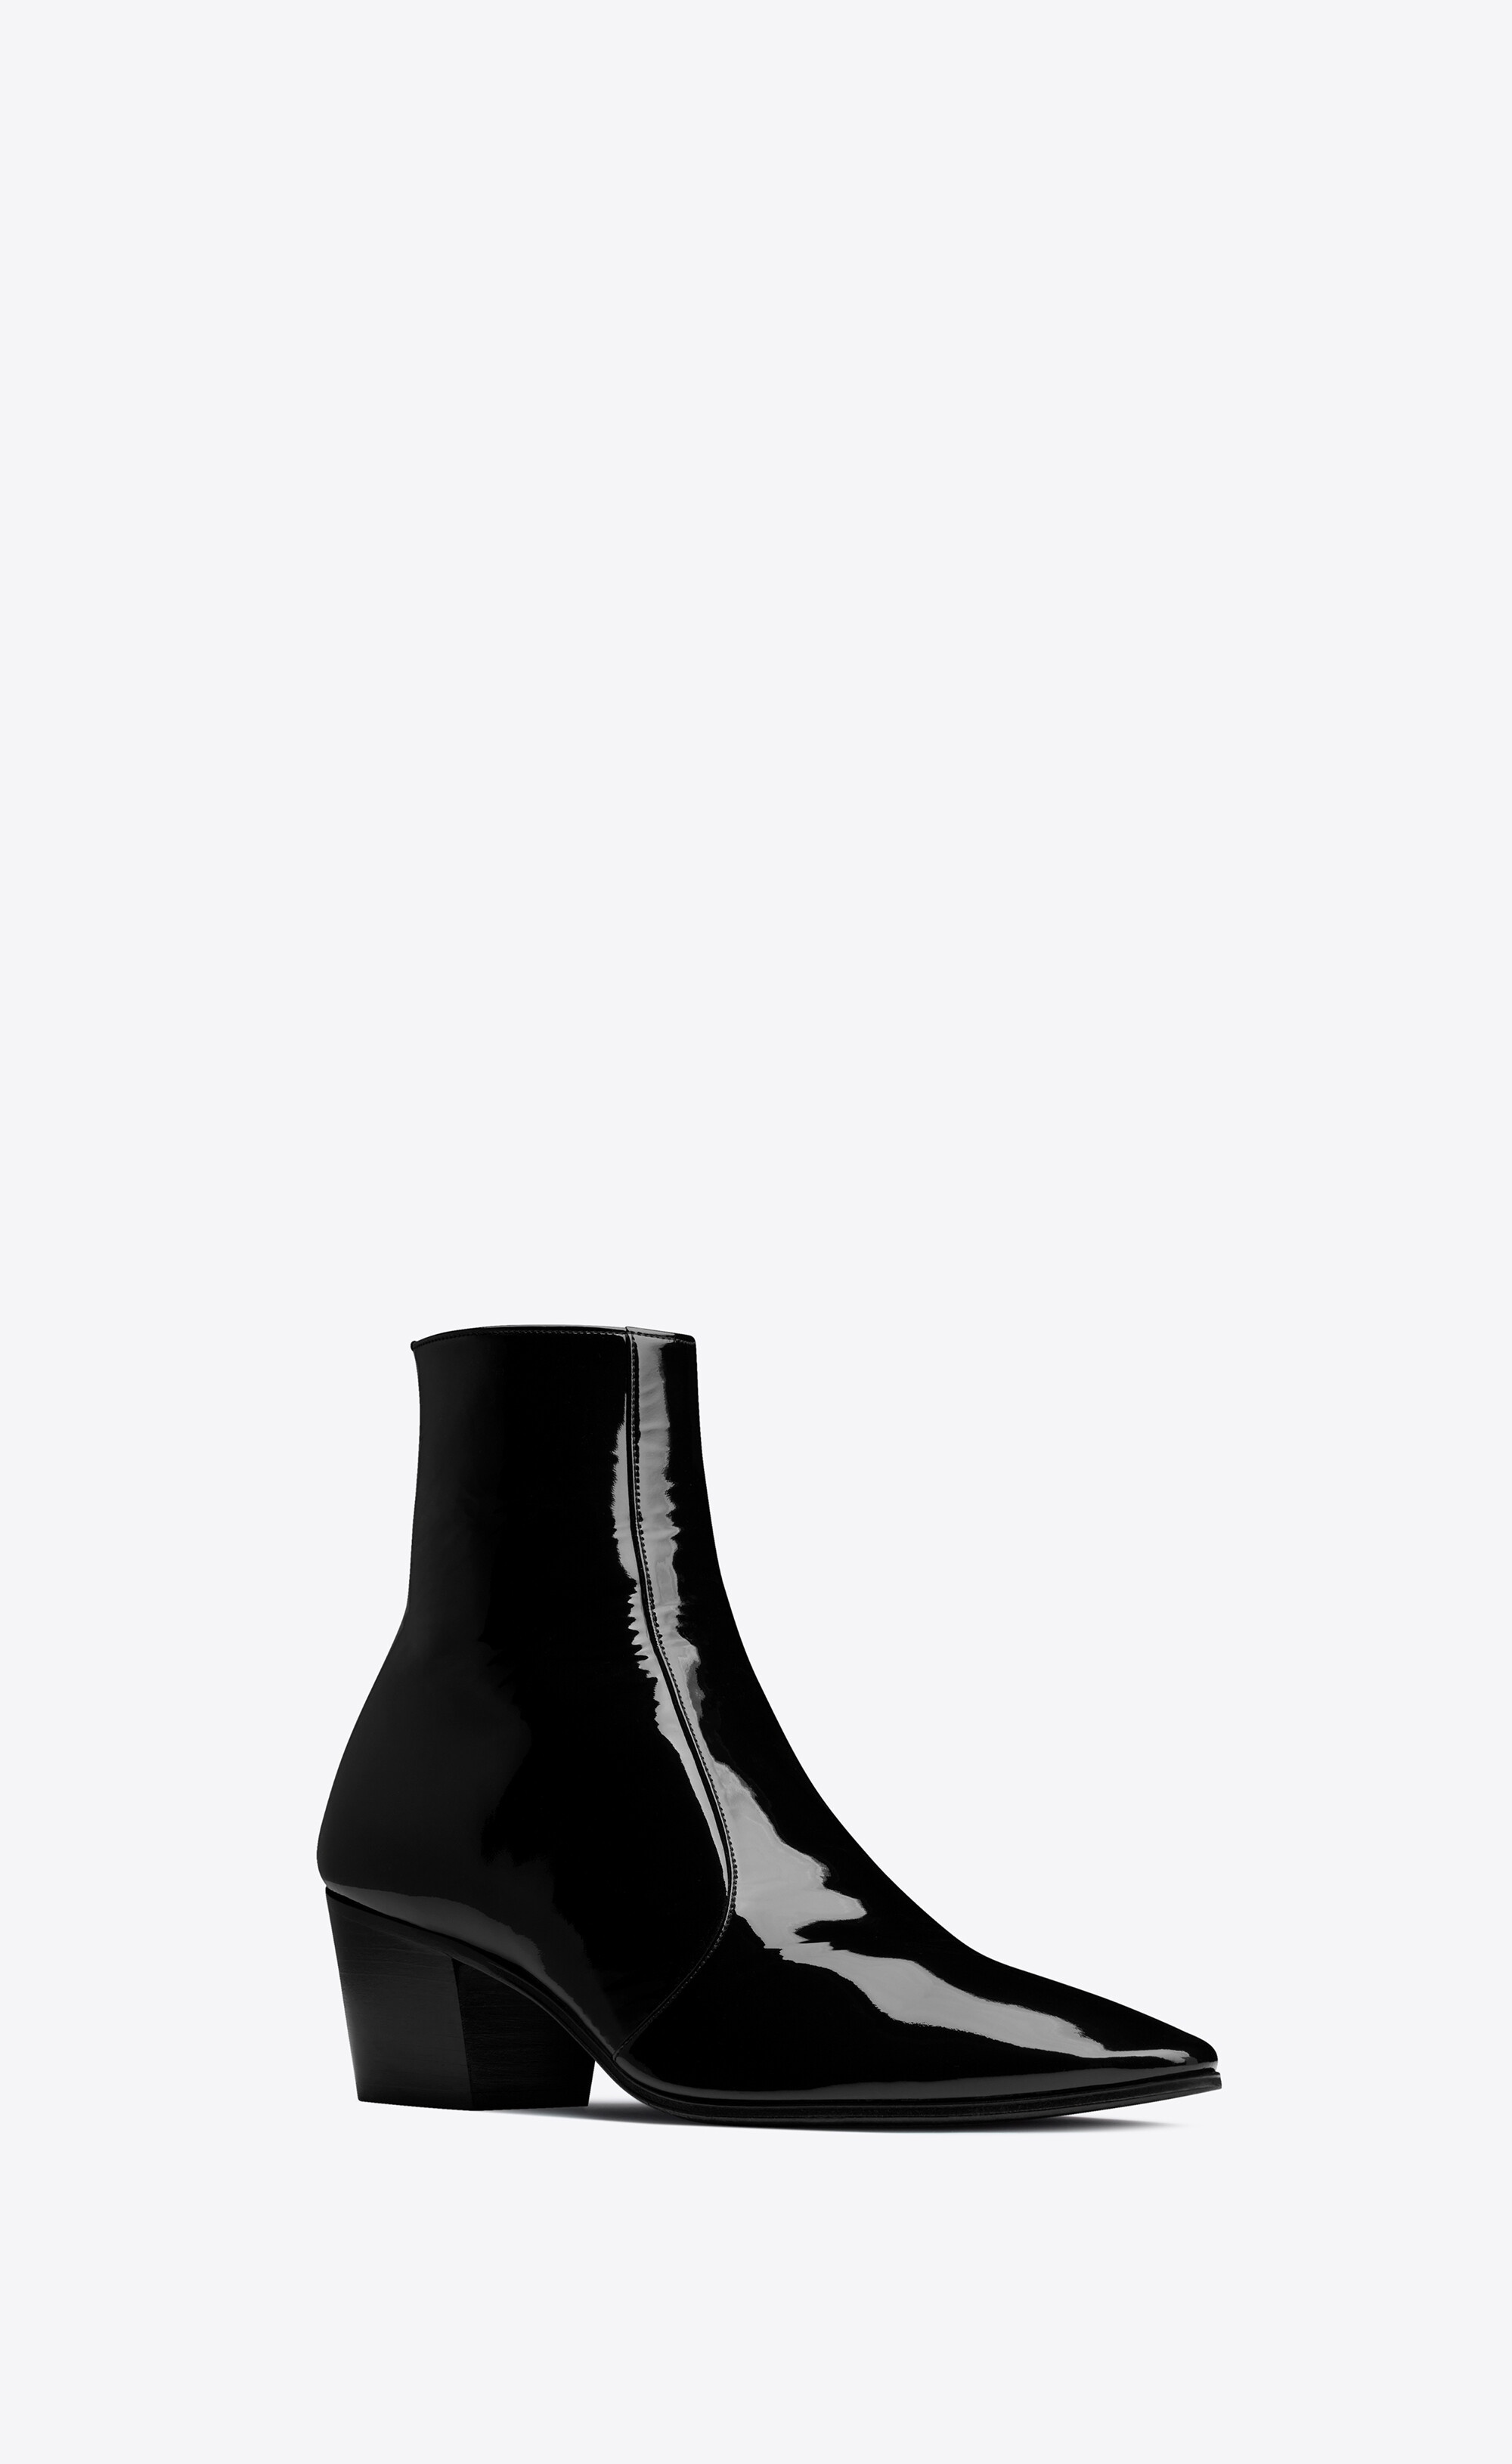 vassili zipped boots in patent leather - 4